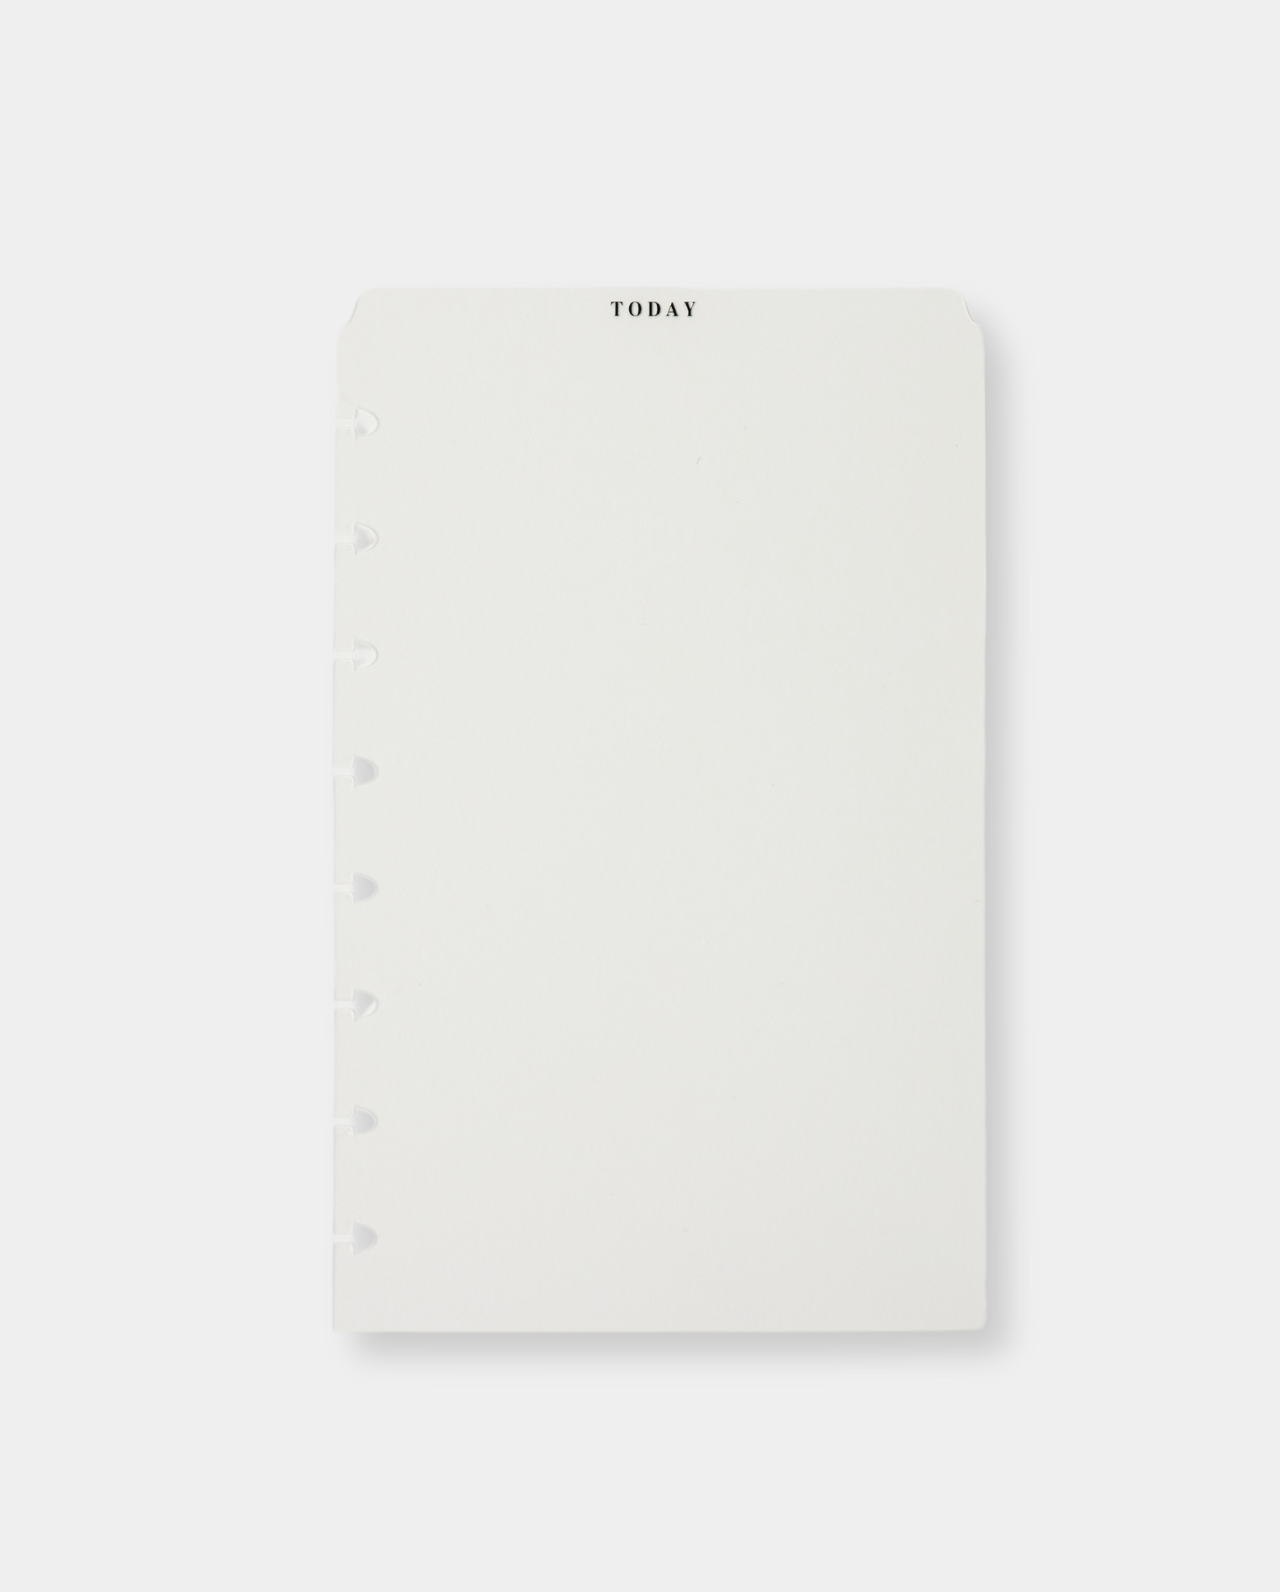 Classic Today Top Tab Planner Divider